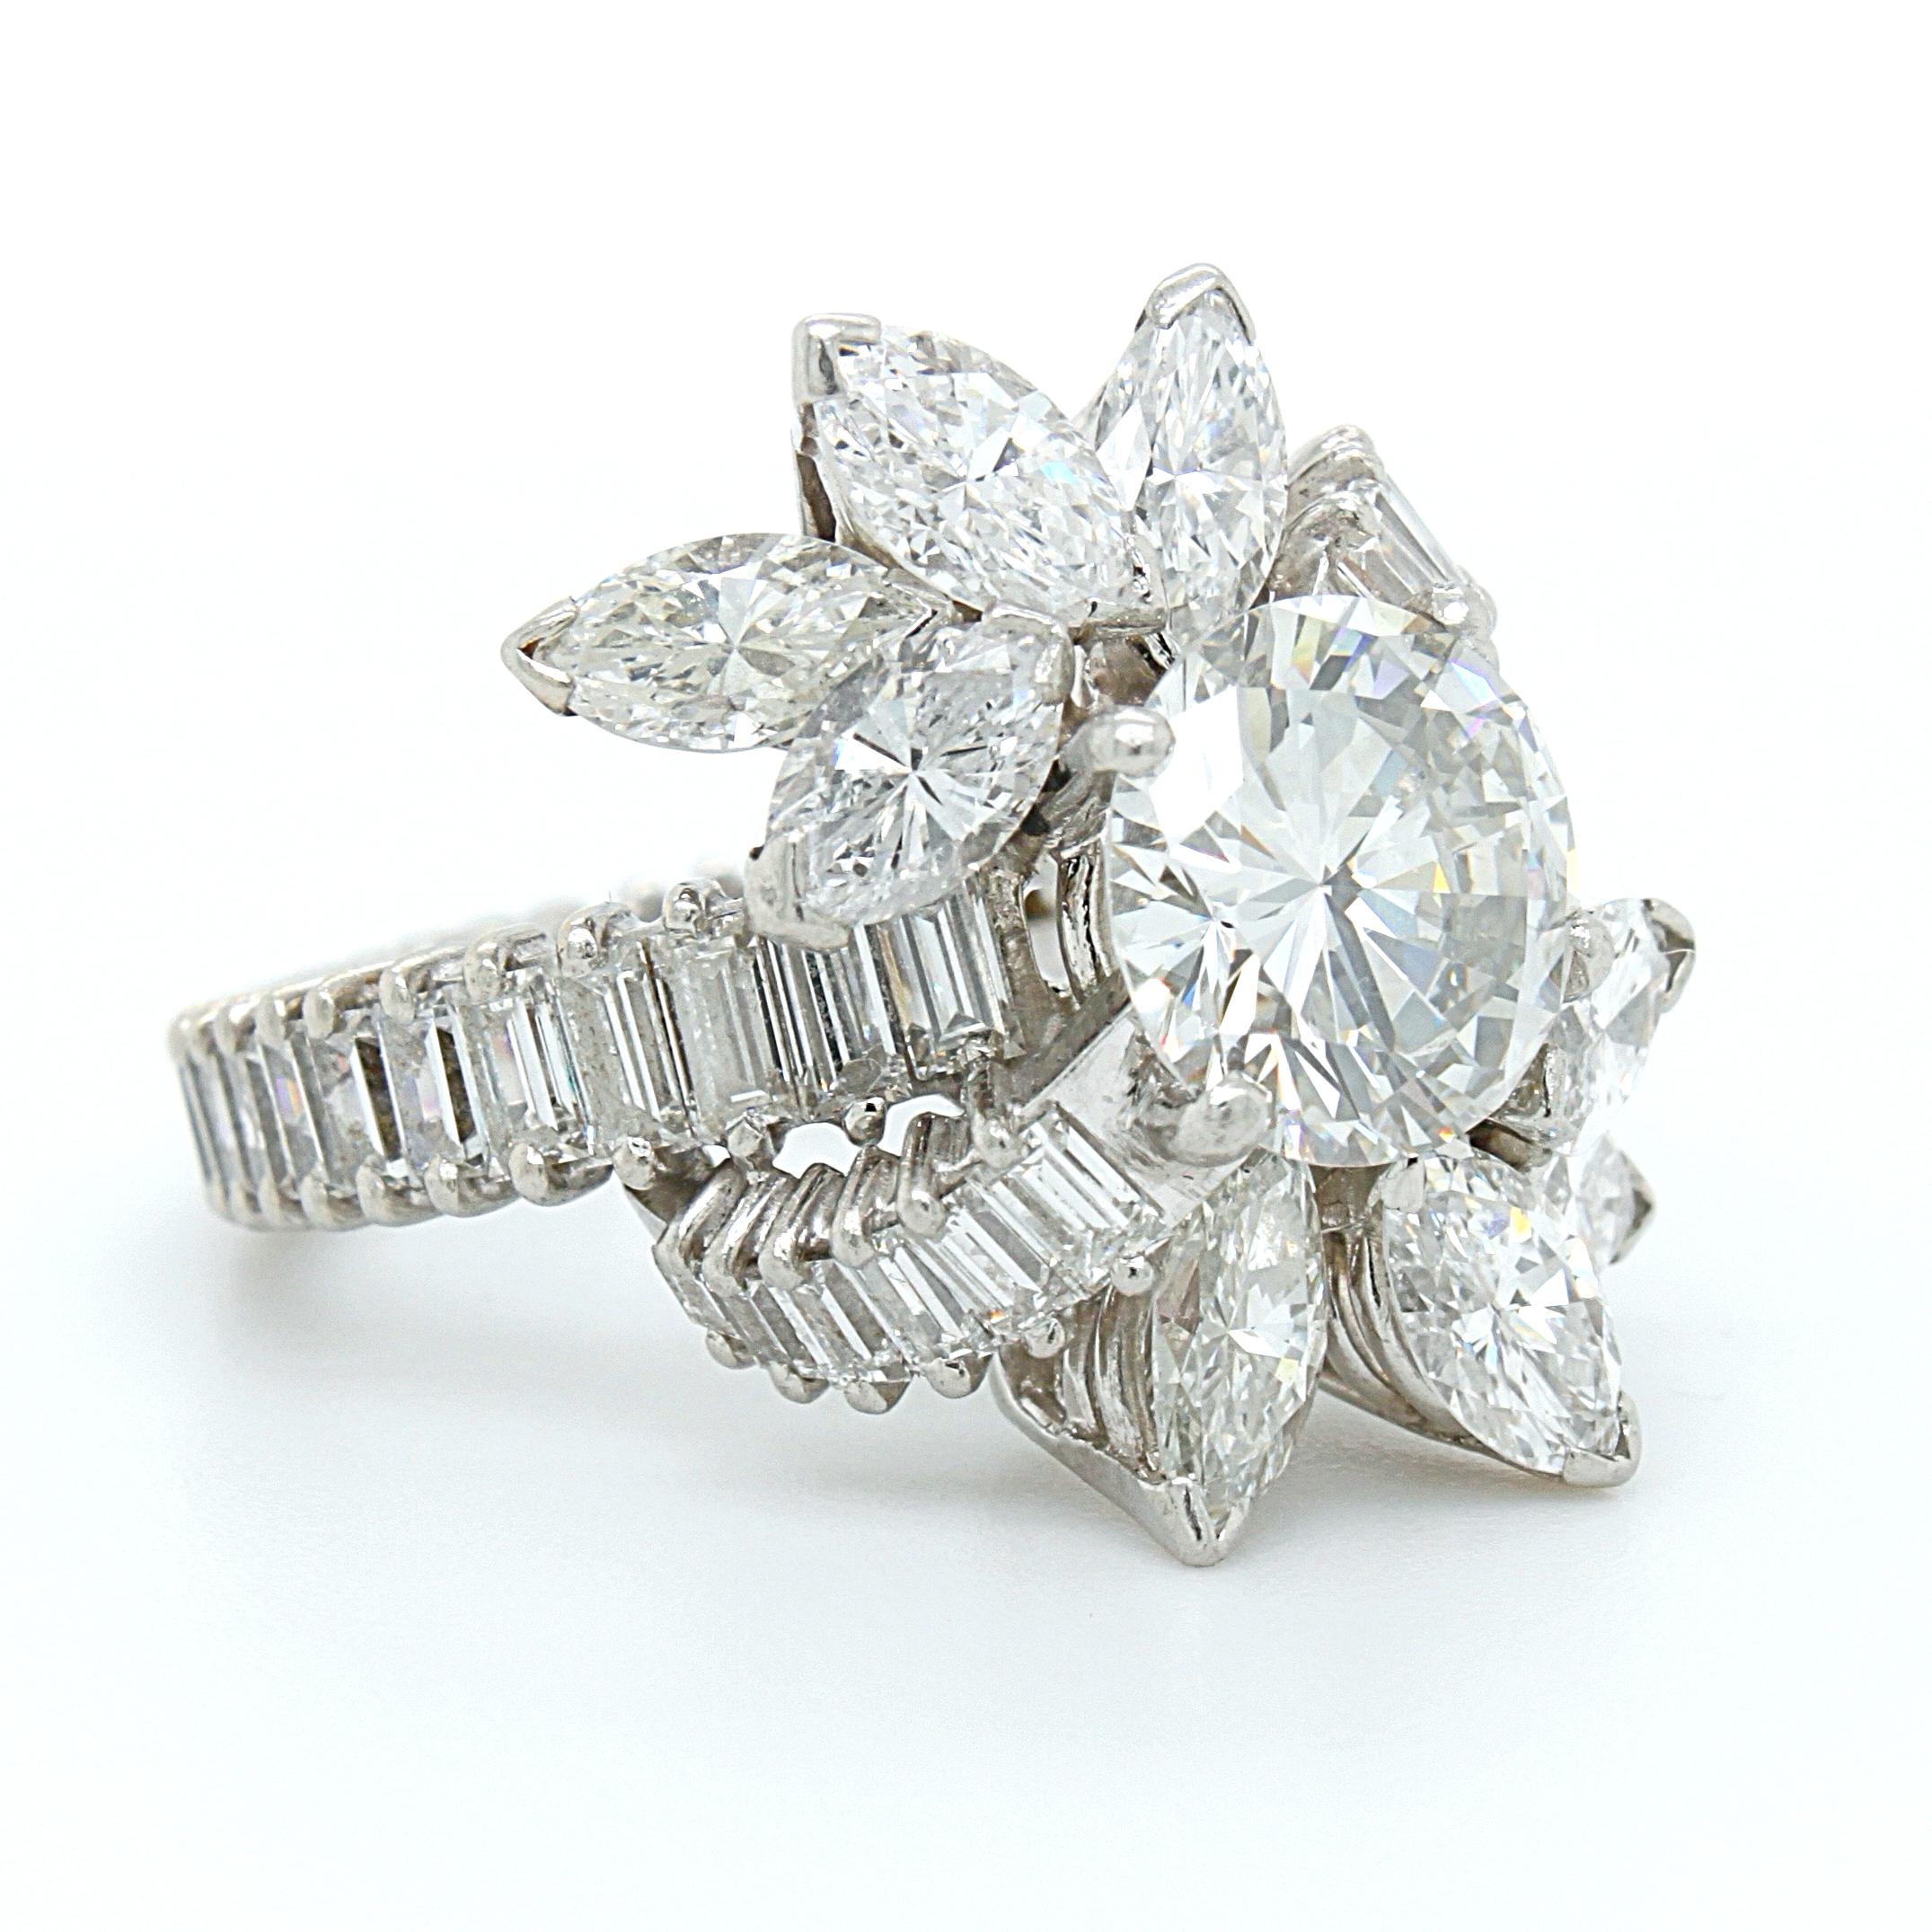 Diamond Solitaire Cocktail Ring, ca. 2.2ct, G/H-VS, 1970s For Sale 1